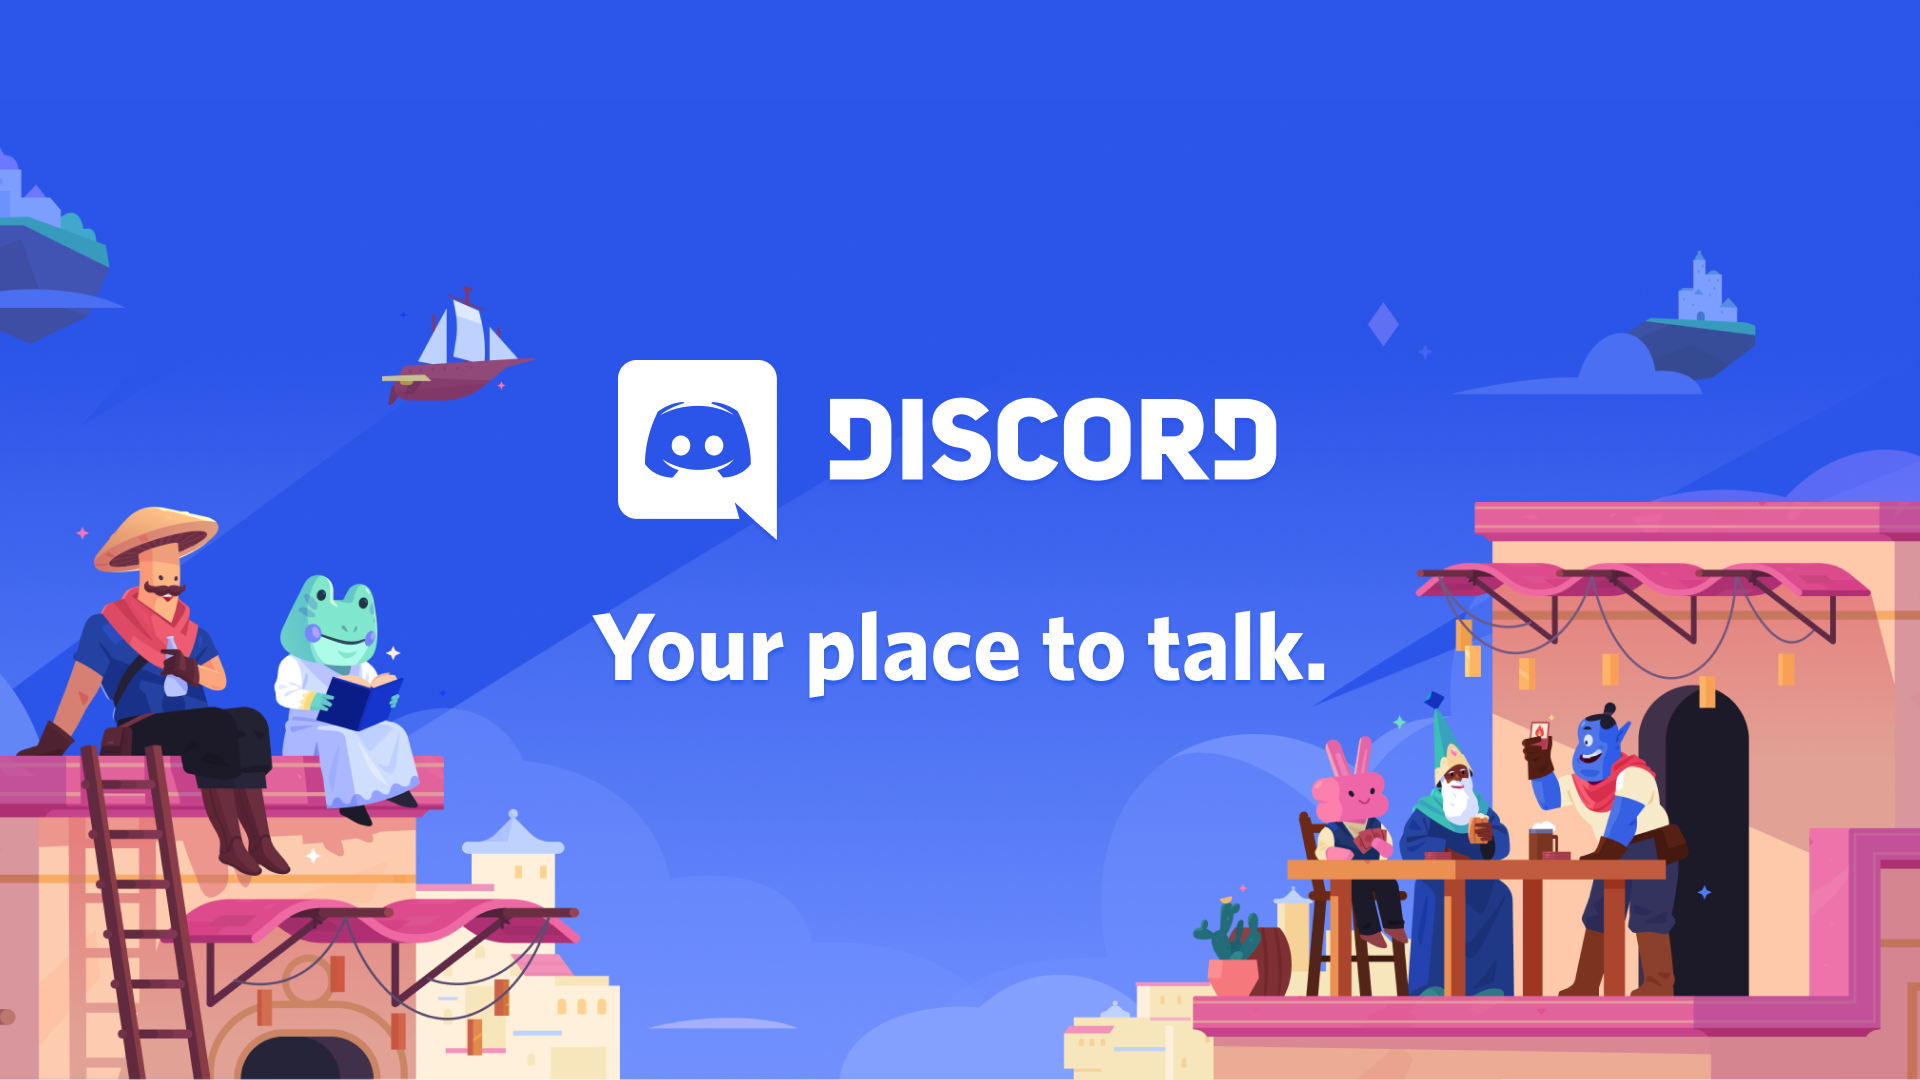 Discord, soon to integrate with PlayStation